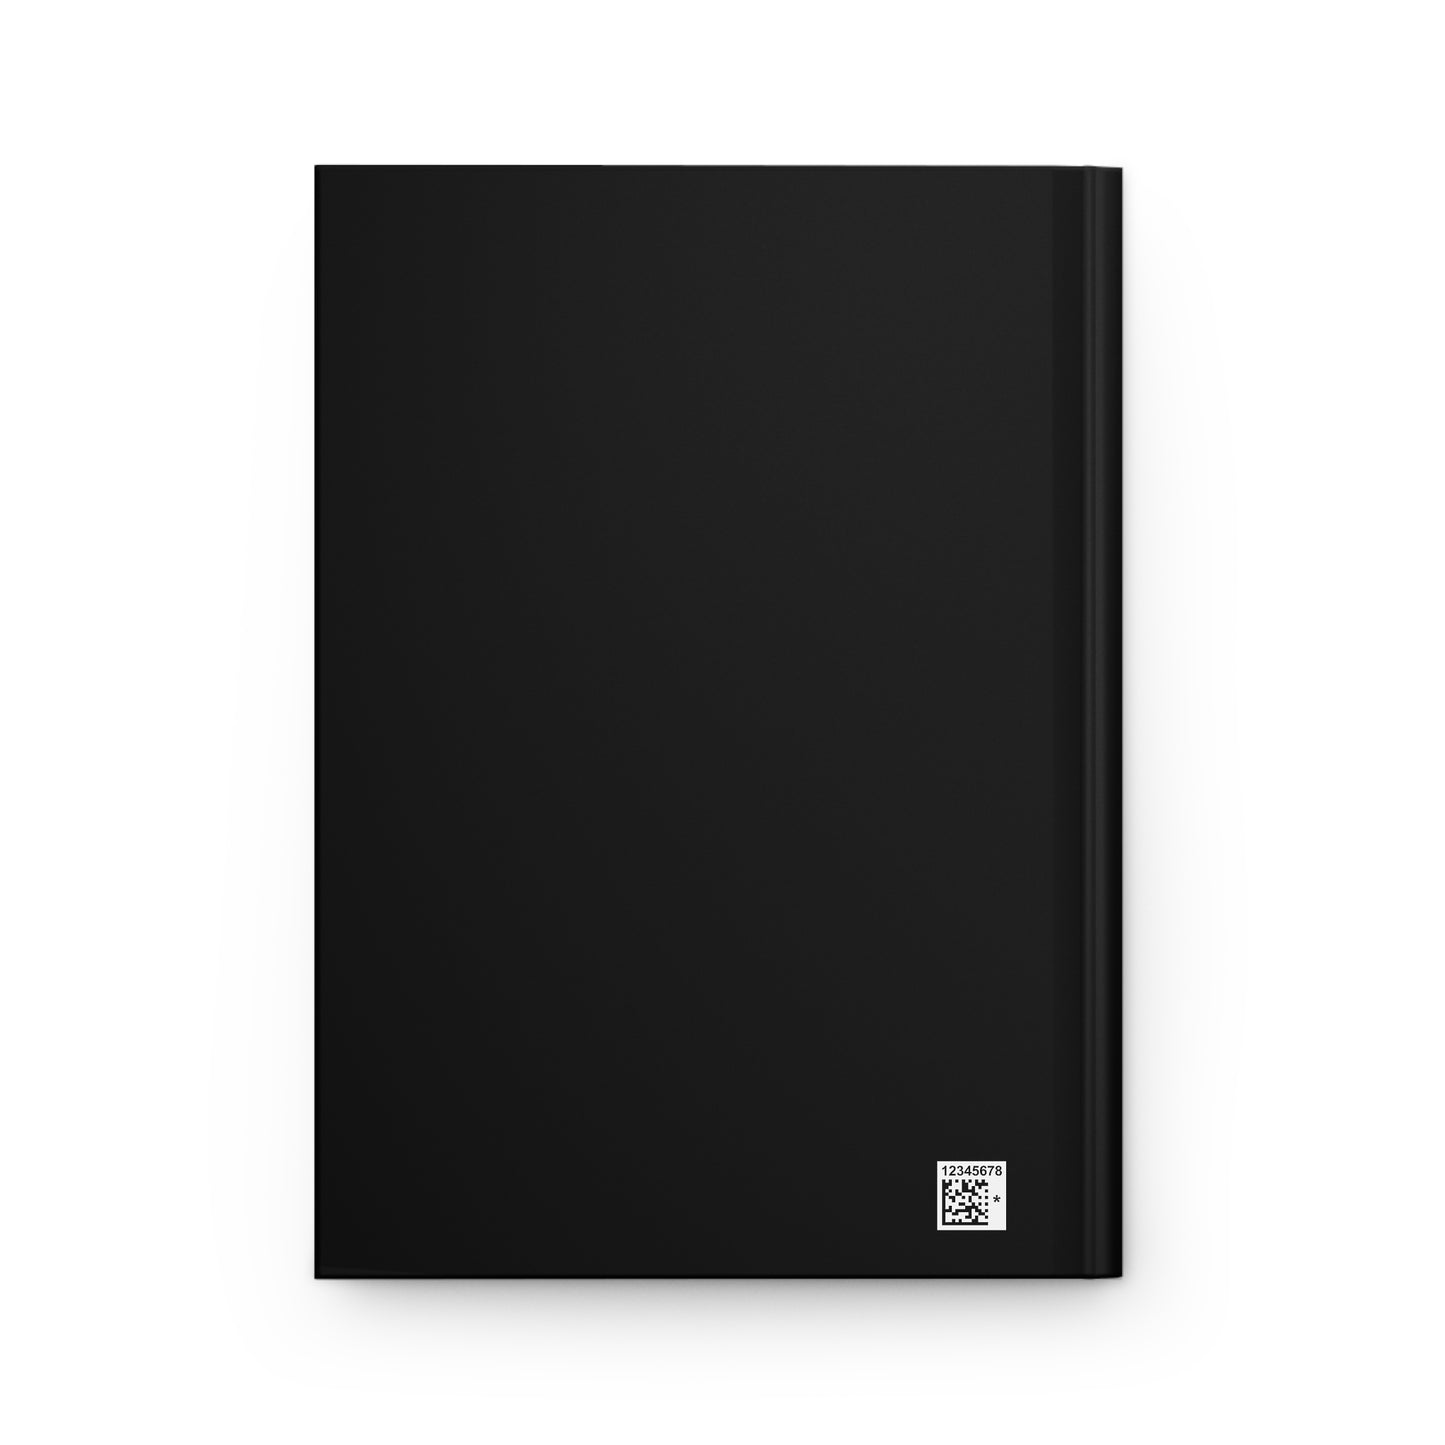 My God My All My Everything Hardcover Journal Matte